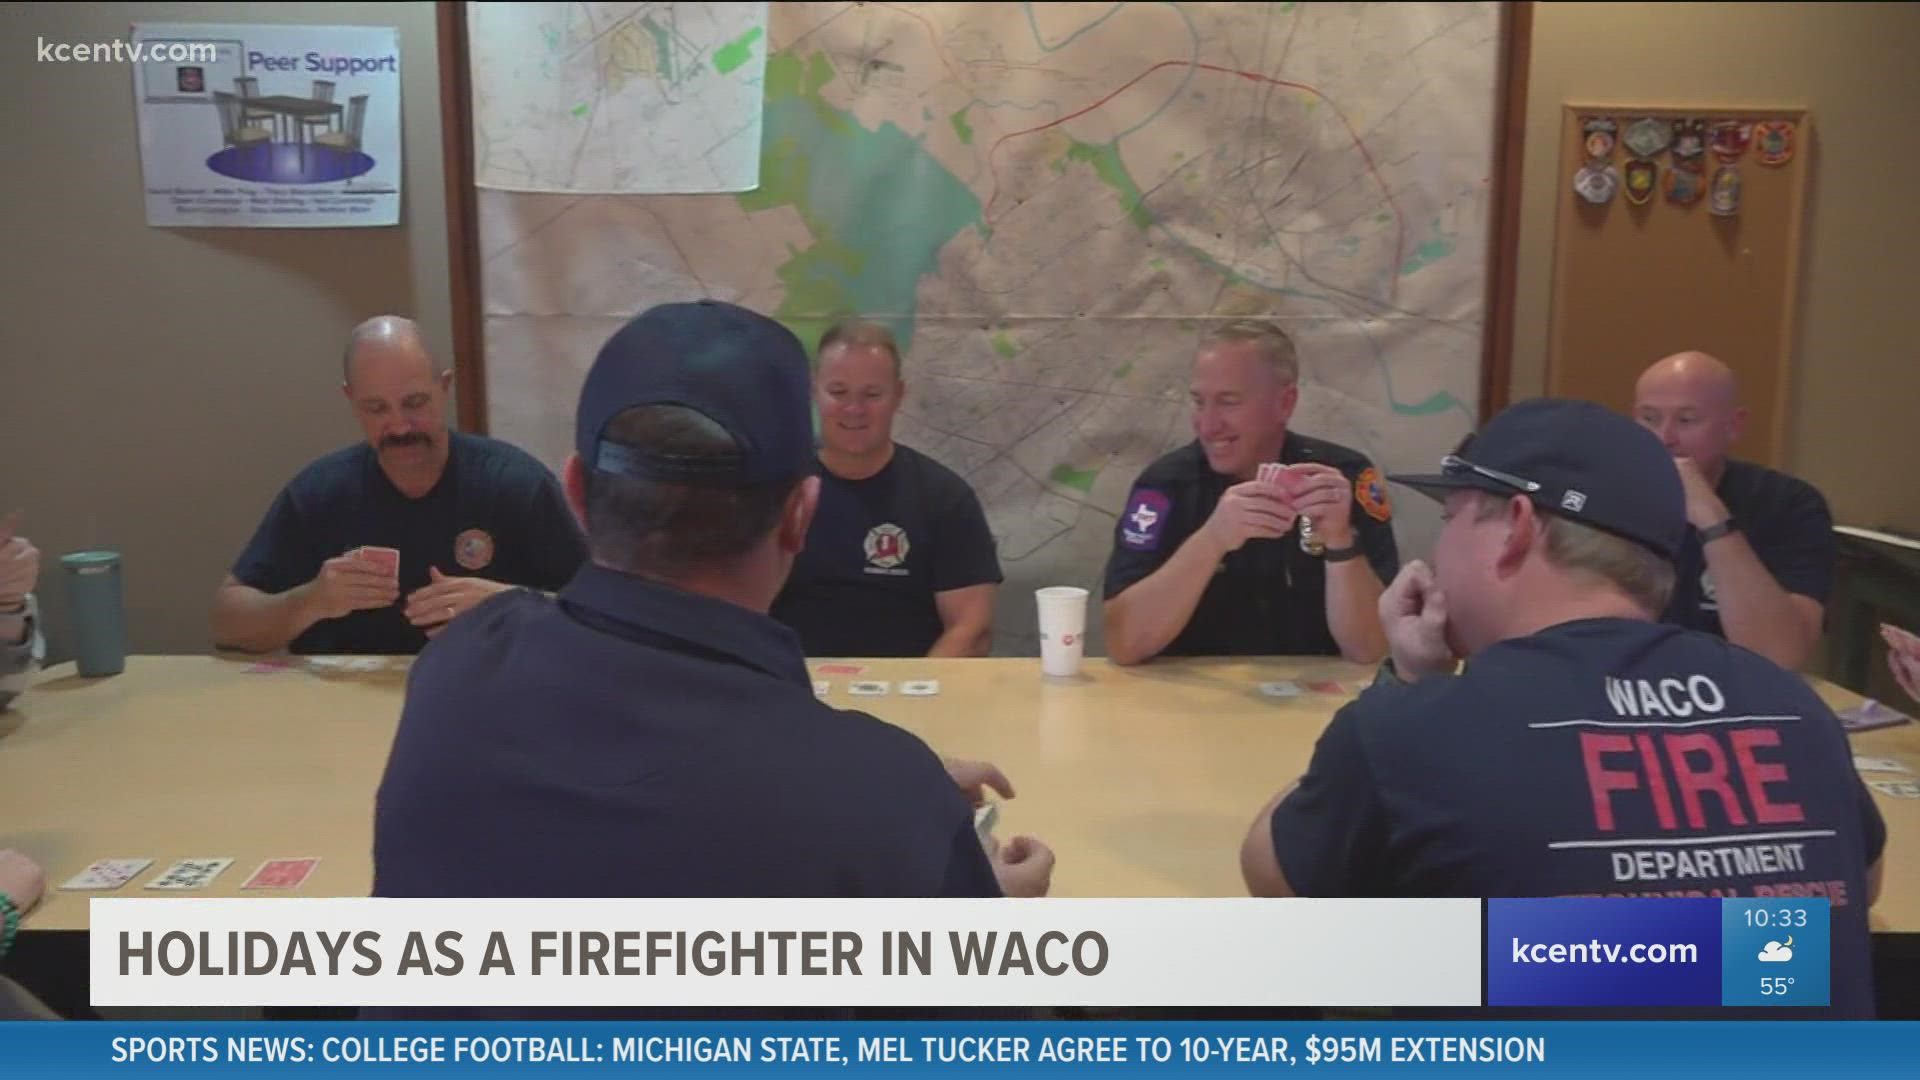 They call themselves the Beasts of the East at Waco Fire Station 1 and it was all smiles for the firefighters who were joined by family at work.